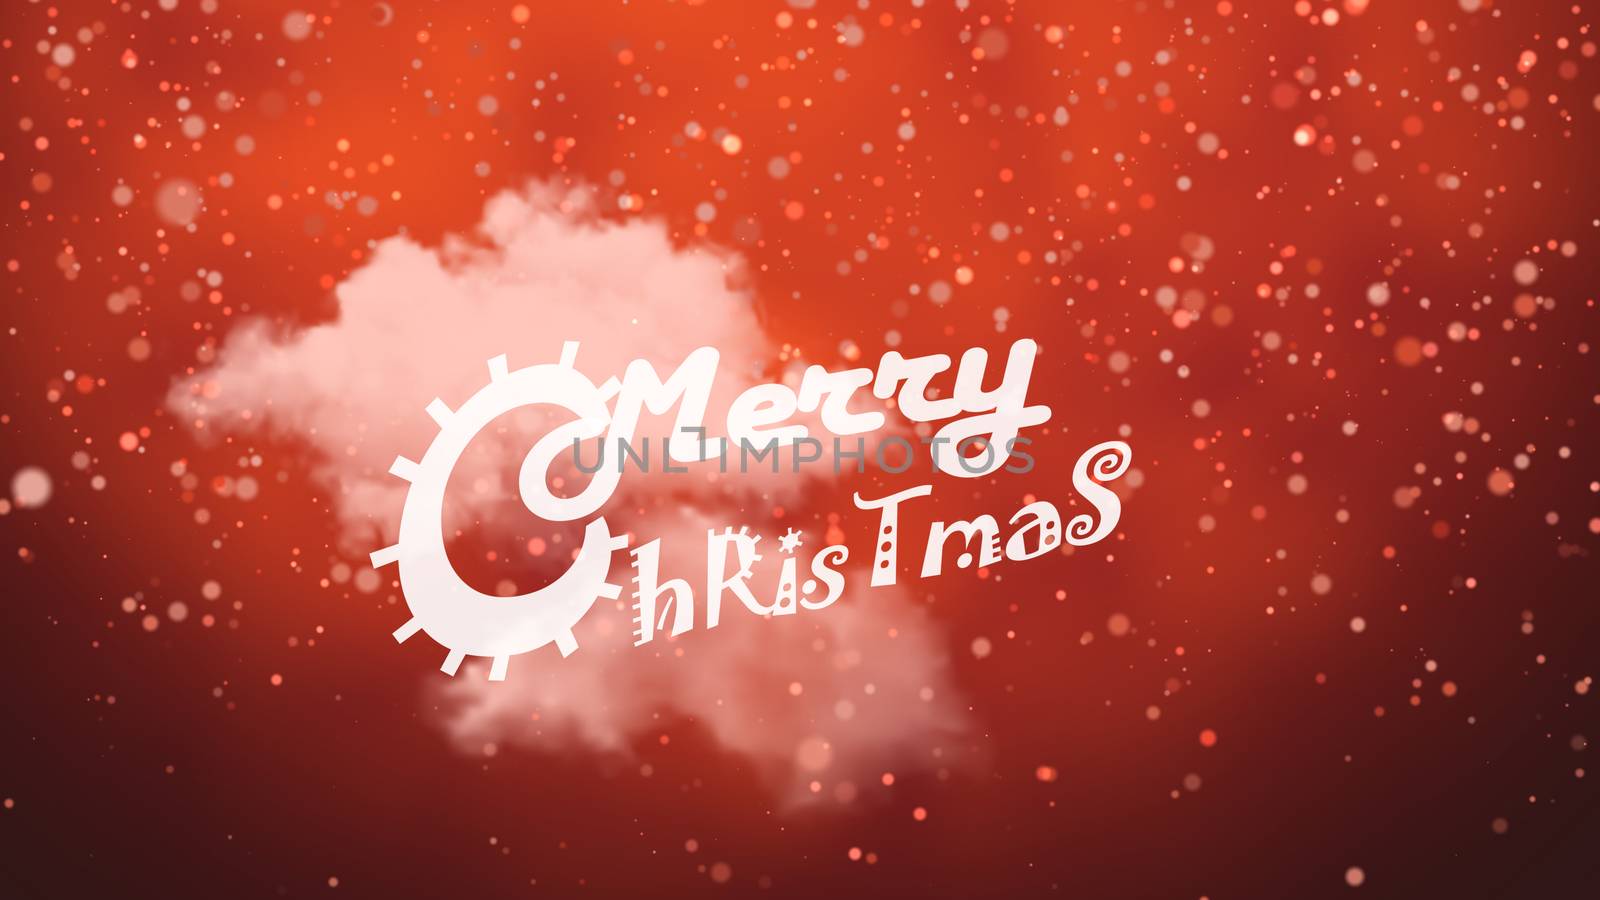 Merry Christmas text on red background  by klss